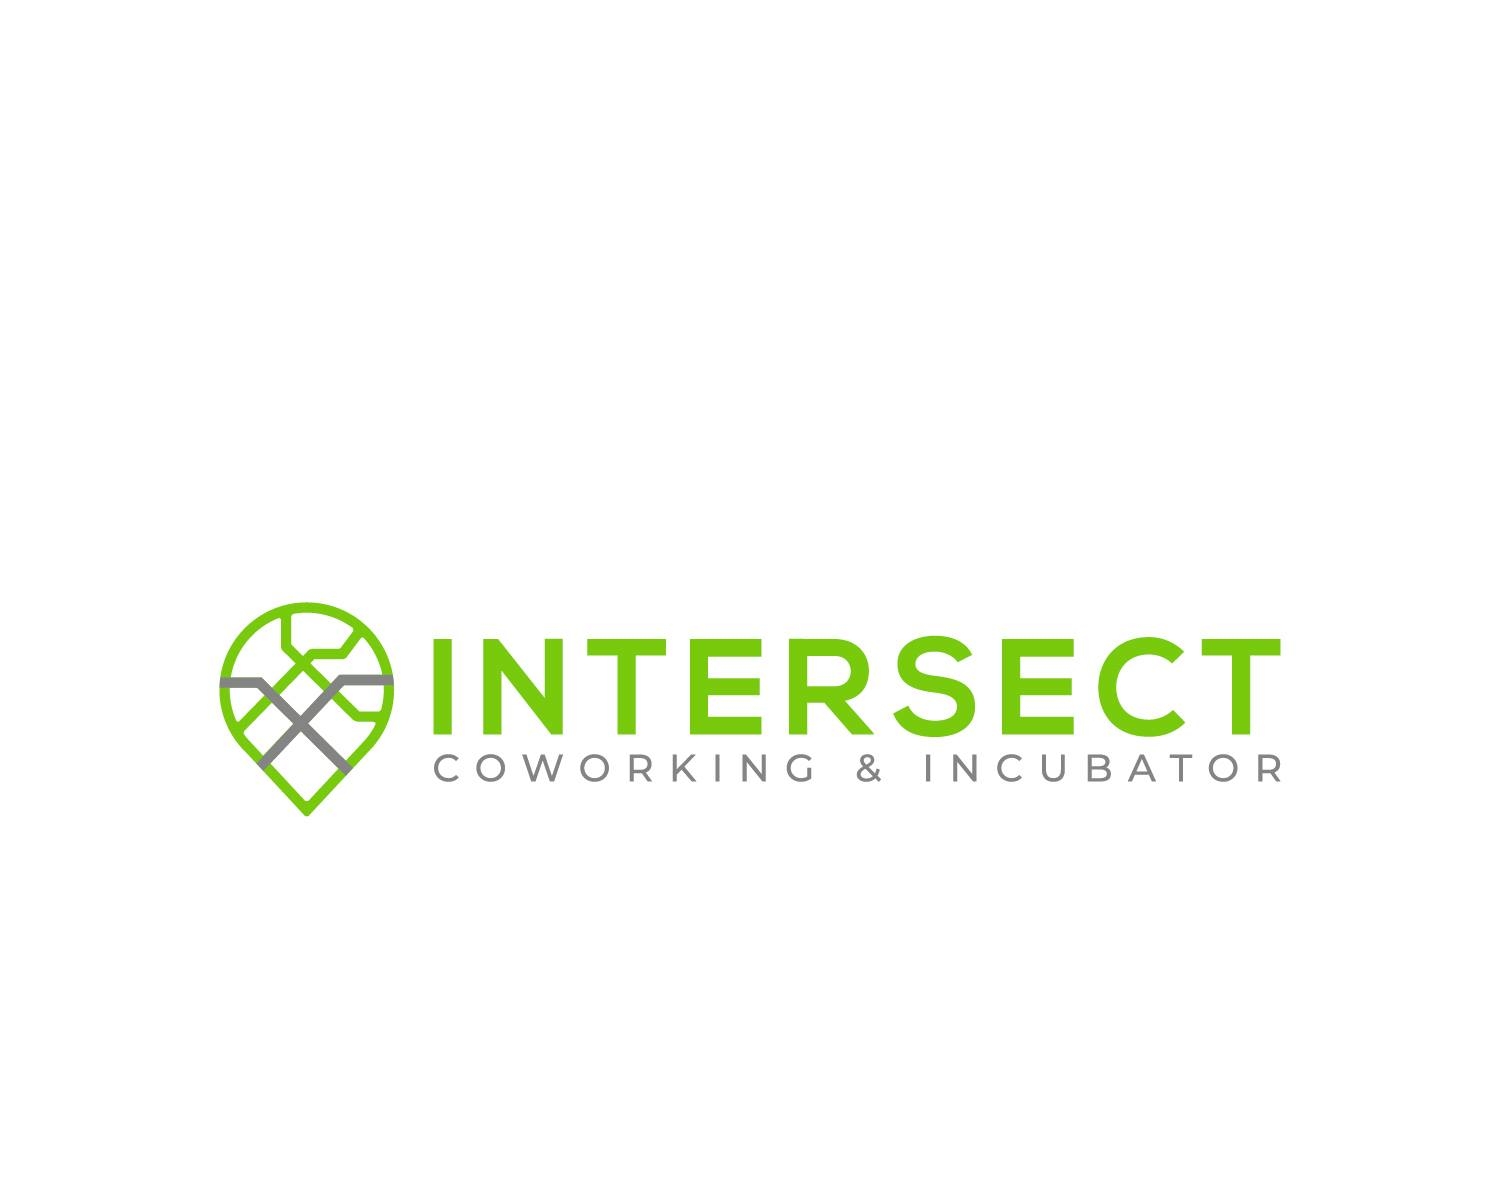 The word intersect in green lettering with coworking and incubator in grey.